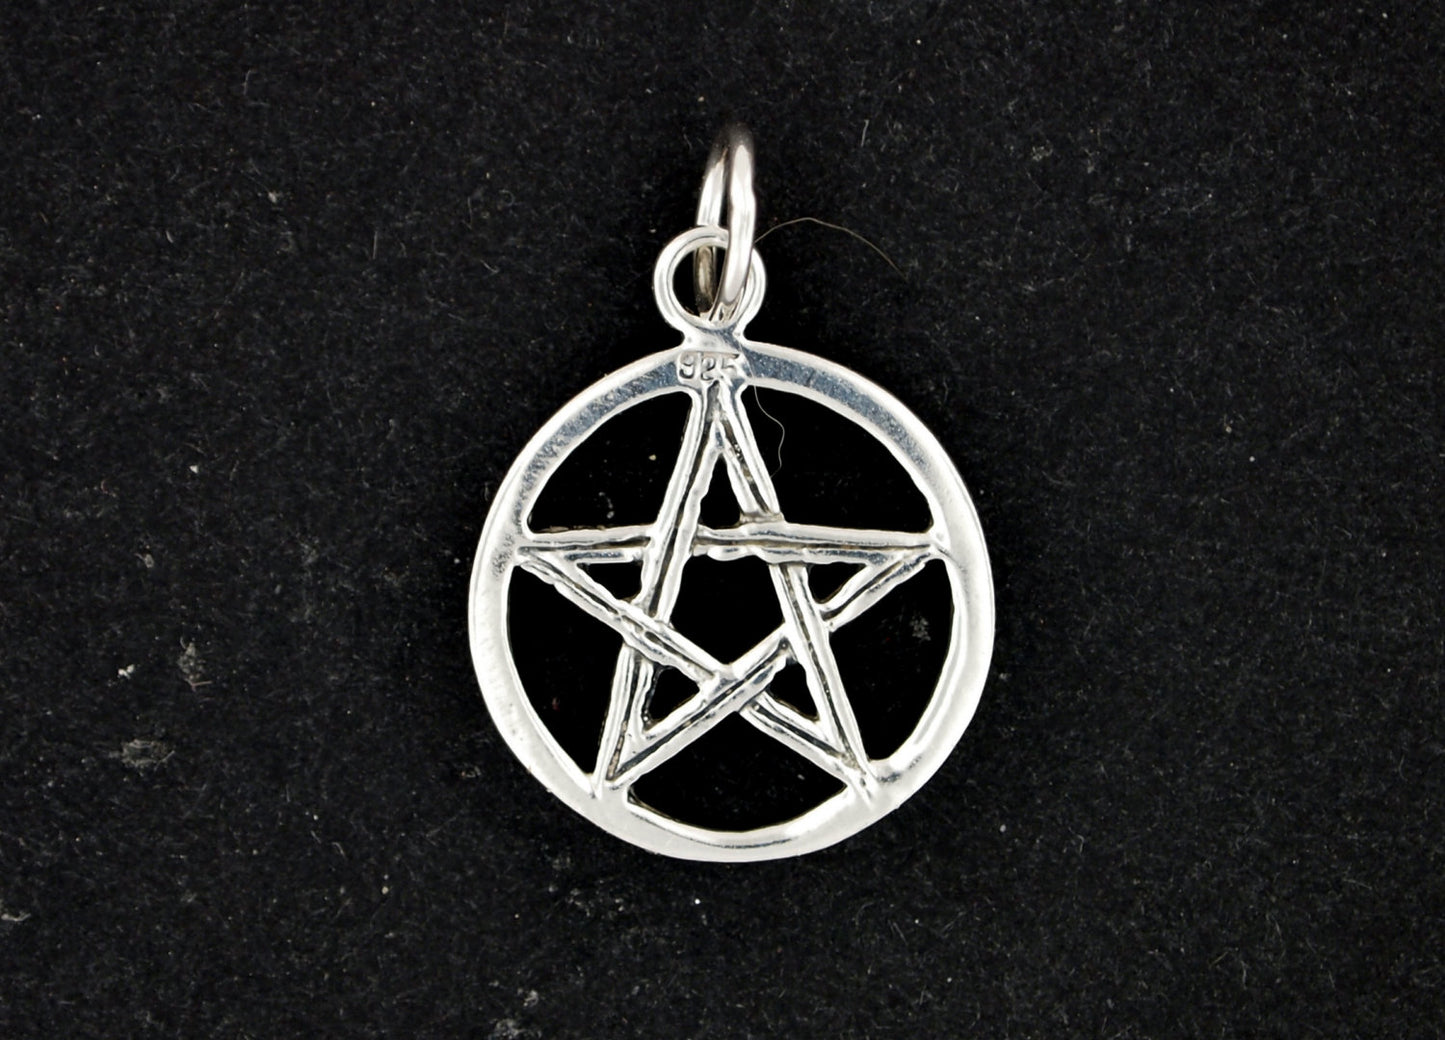 Small Two Sided Pentacle Pendant in 925 Silver or Bronze, Small Pentacle Charm Jewelry, Small Star Charm, Jewellery Gift for Wicca Pagan, Sterling Silver Pentacle Pendant, Pagan Pentacle Pendant, Small Pentacle Pendant, Sterling Silver Pagan Pendant